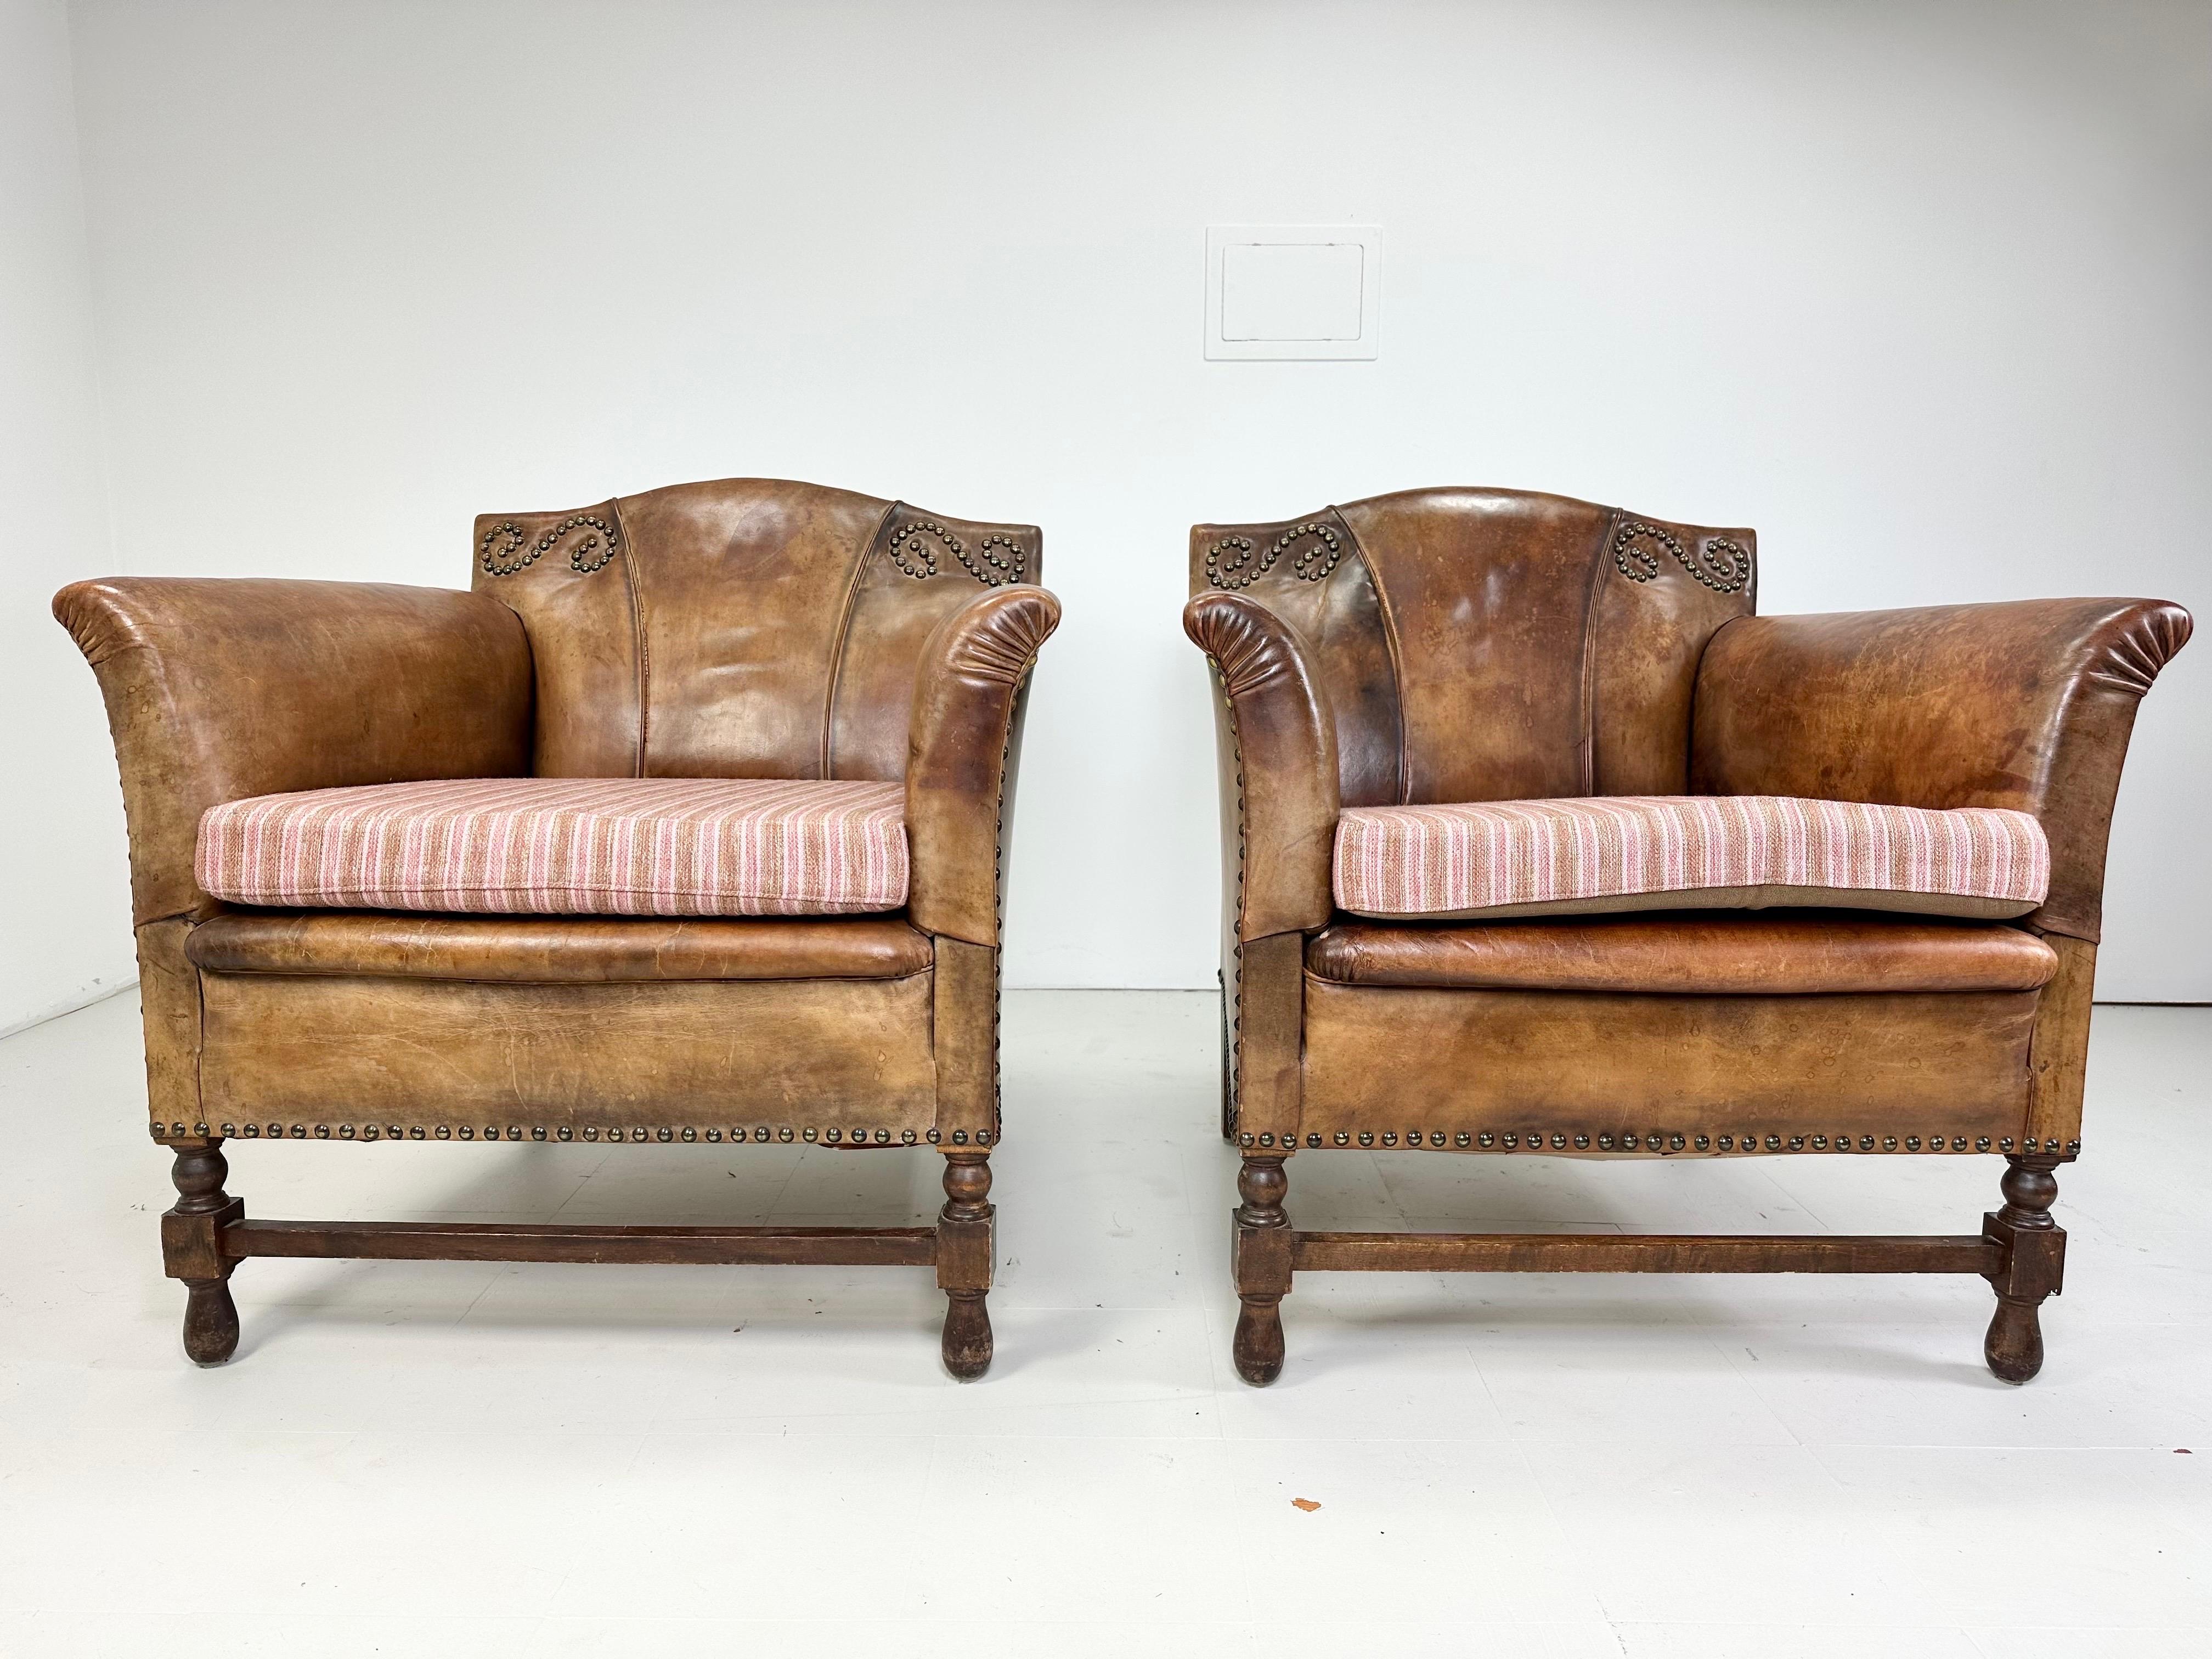 Pair of Early 20th Century European Leather Lounge Chairs In Good Condition For Sale In Turners Falls, MA